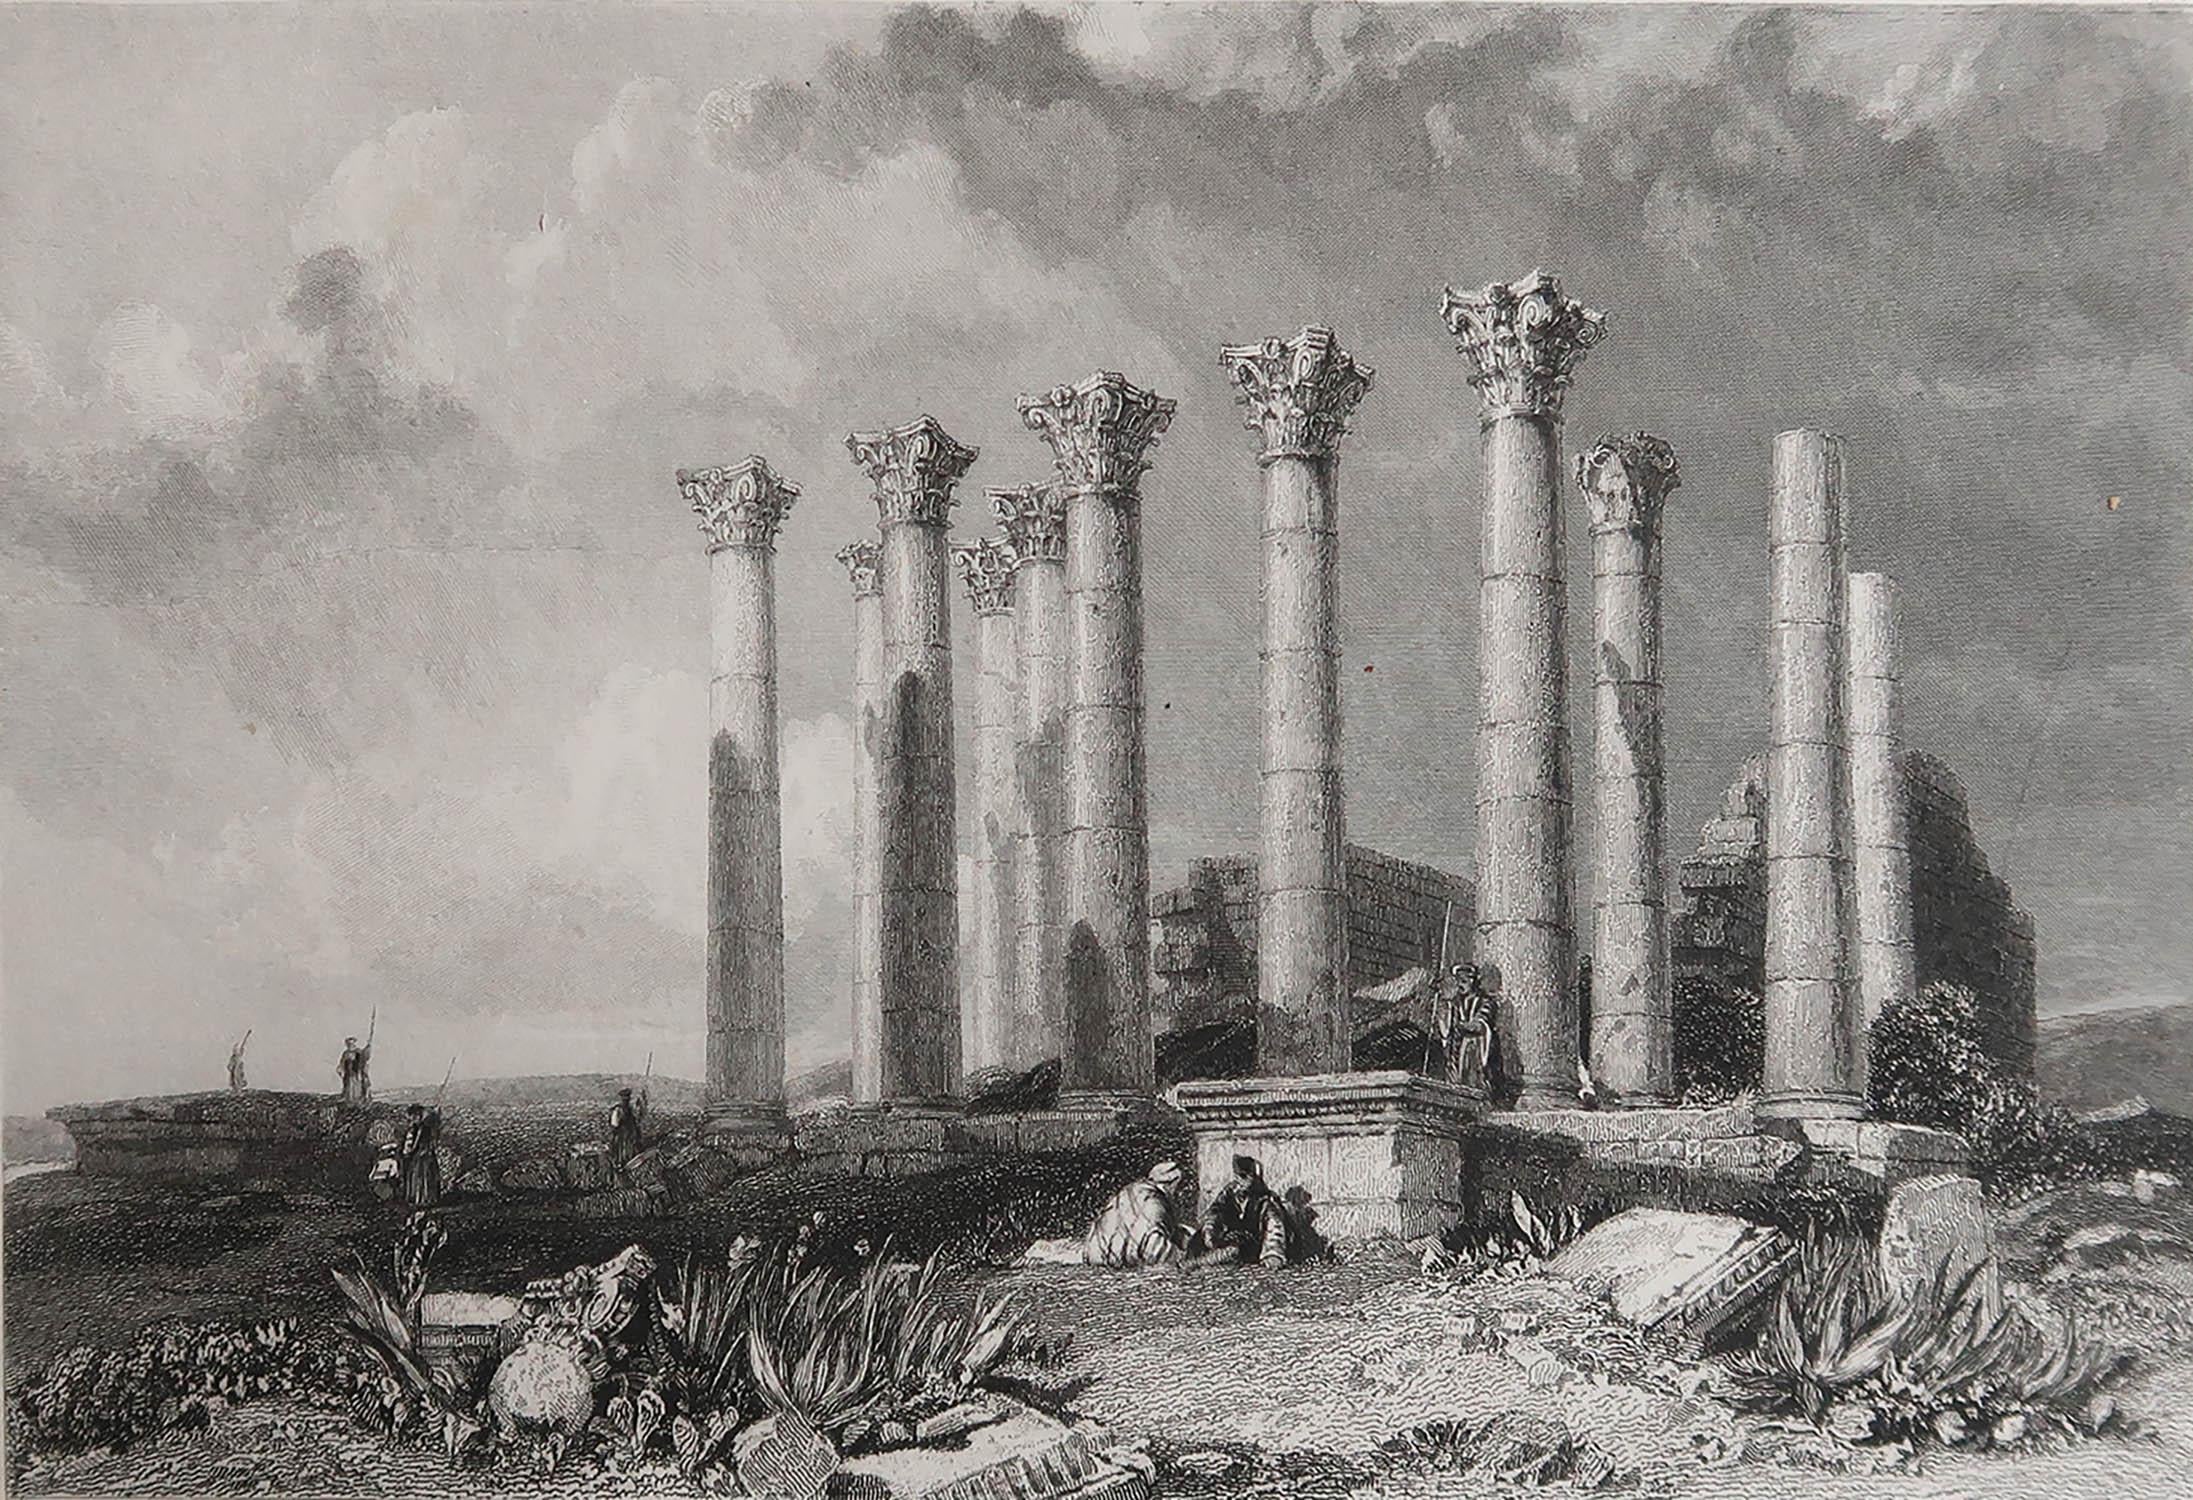 Wonderful image of The Temple of Artemis

Fine steel engraving after J.D Harding

Published by John Murray & Son, London. Dated 1836

Unframed.

.